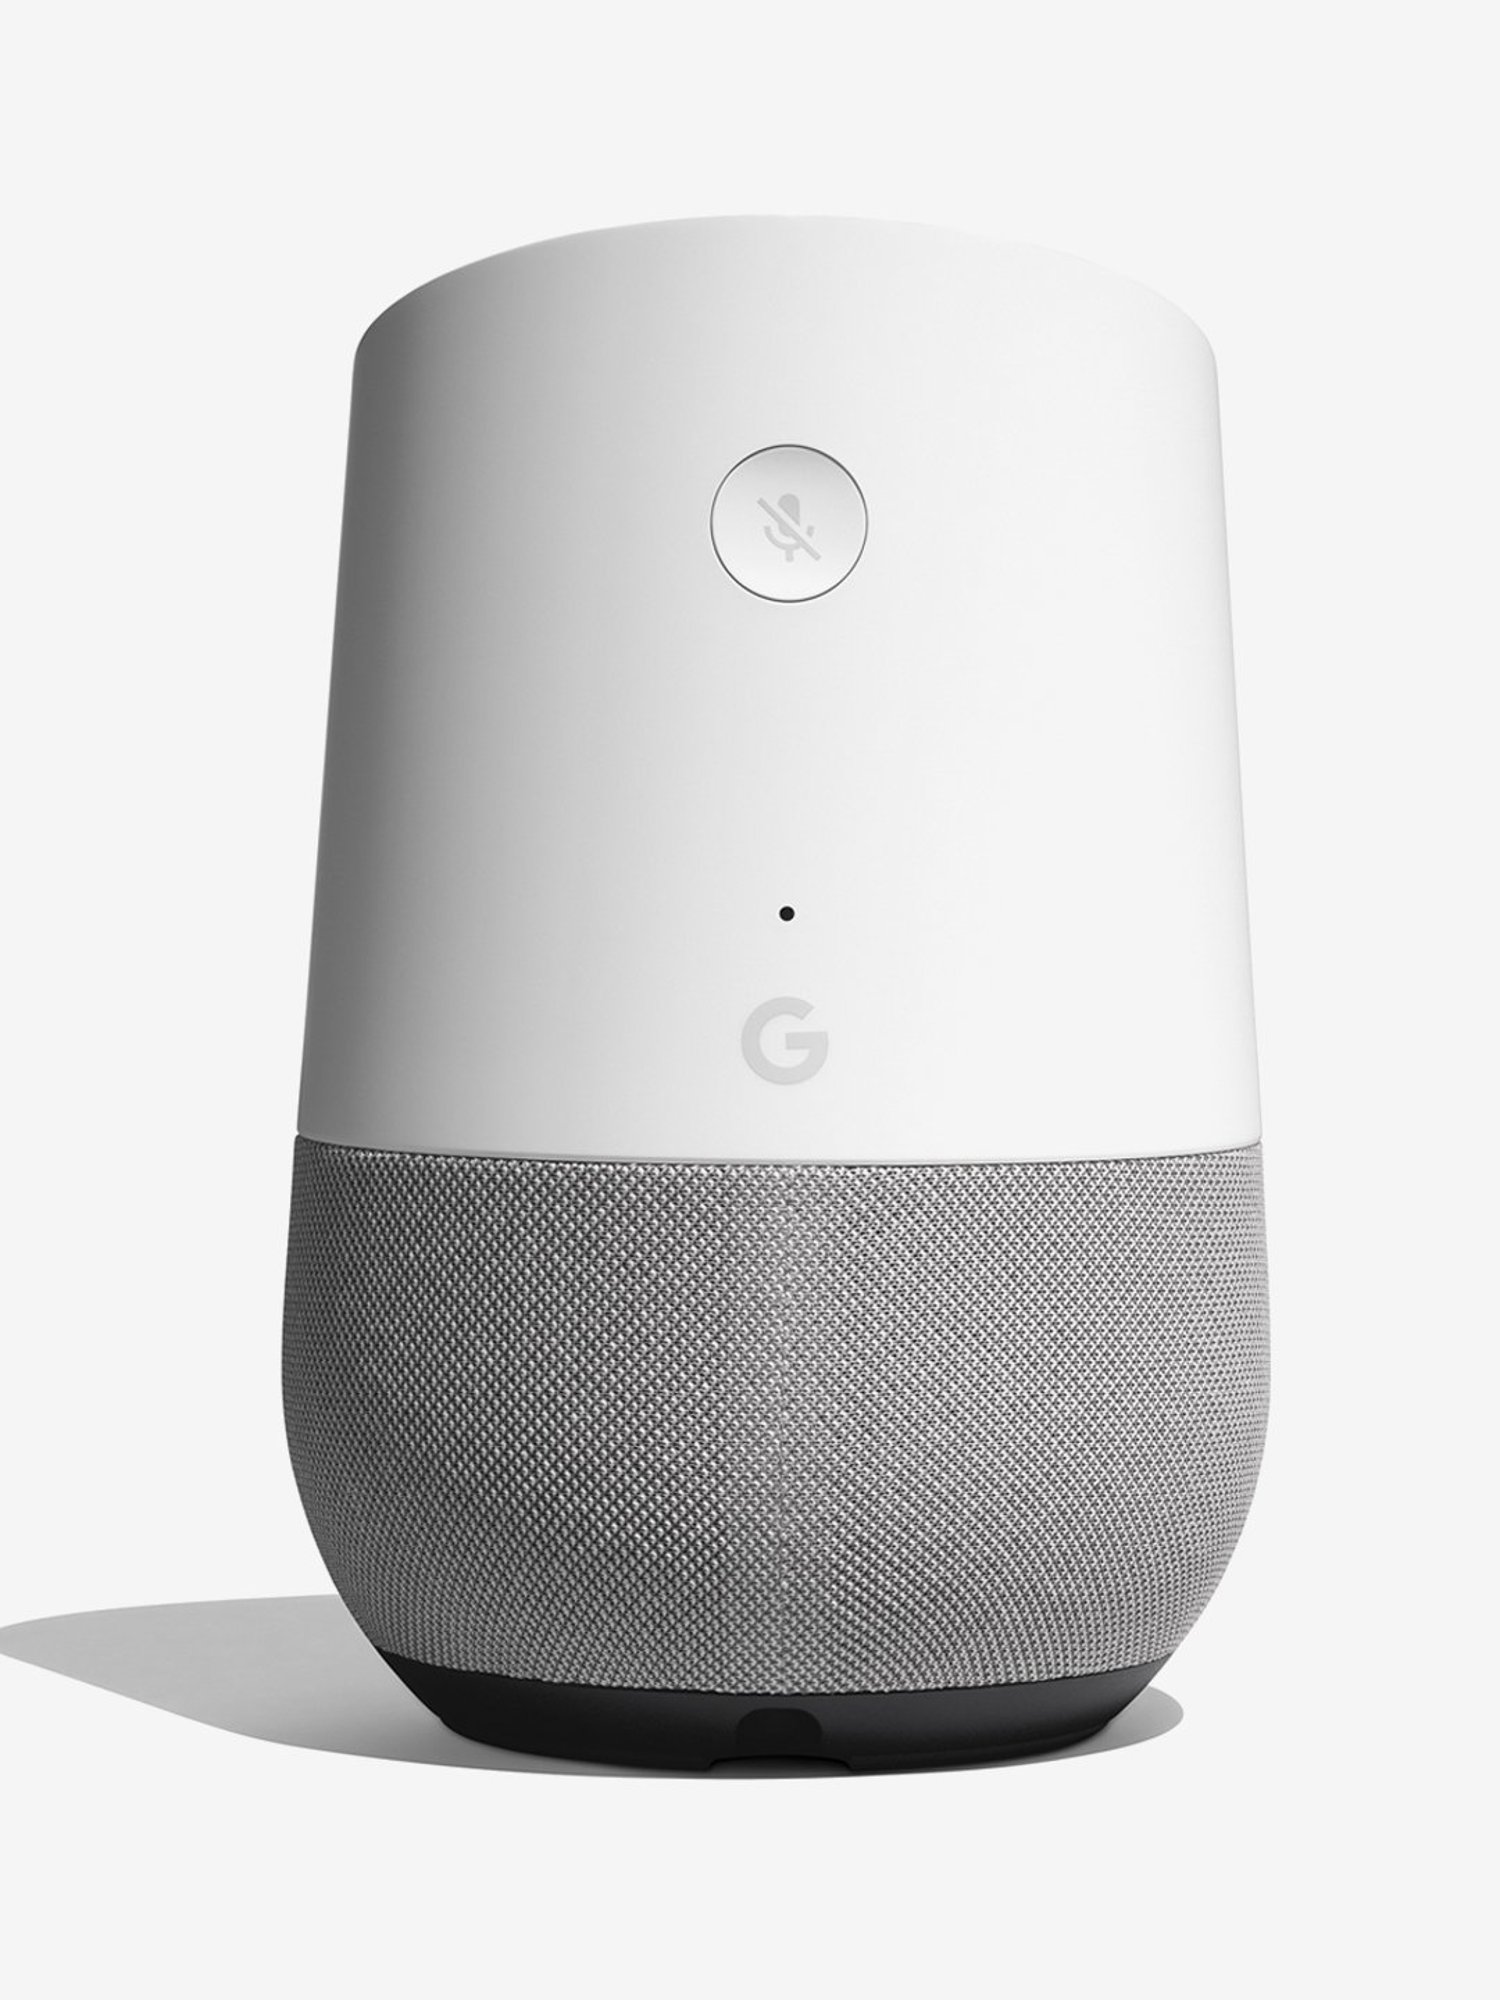 The Google Home smart home system